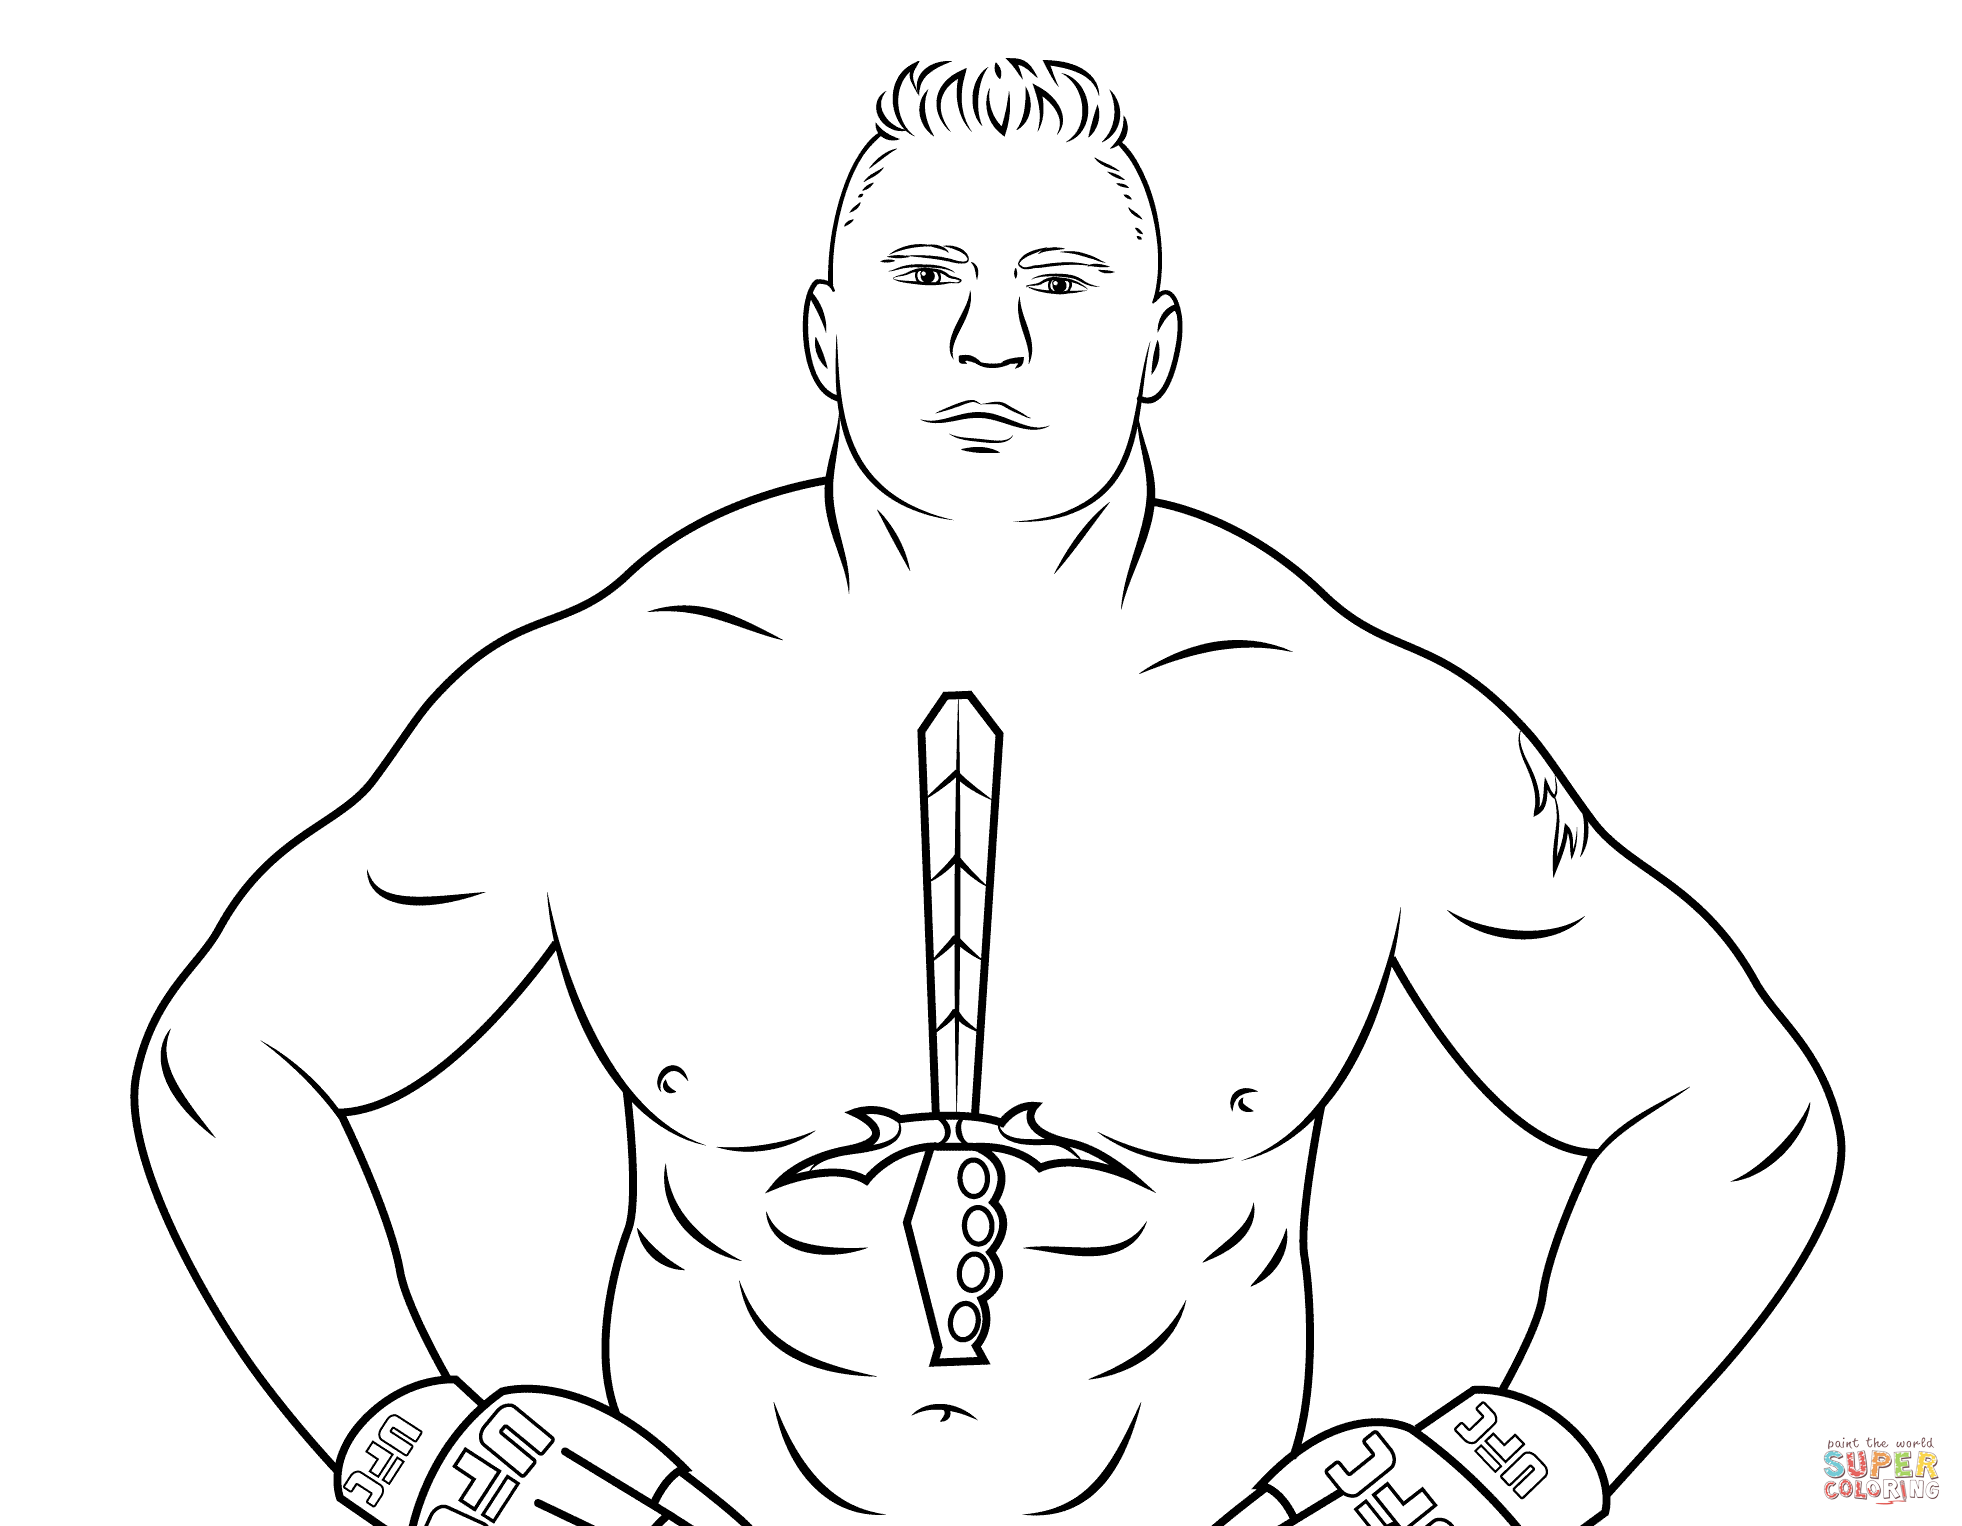 Wwe brock lesnar coloring page free printable coloring pages